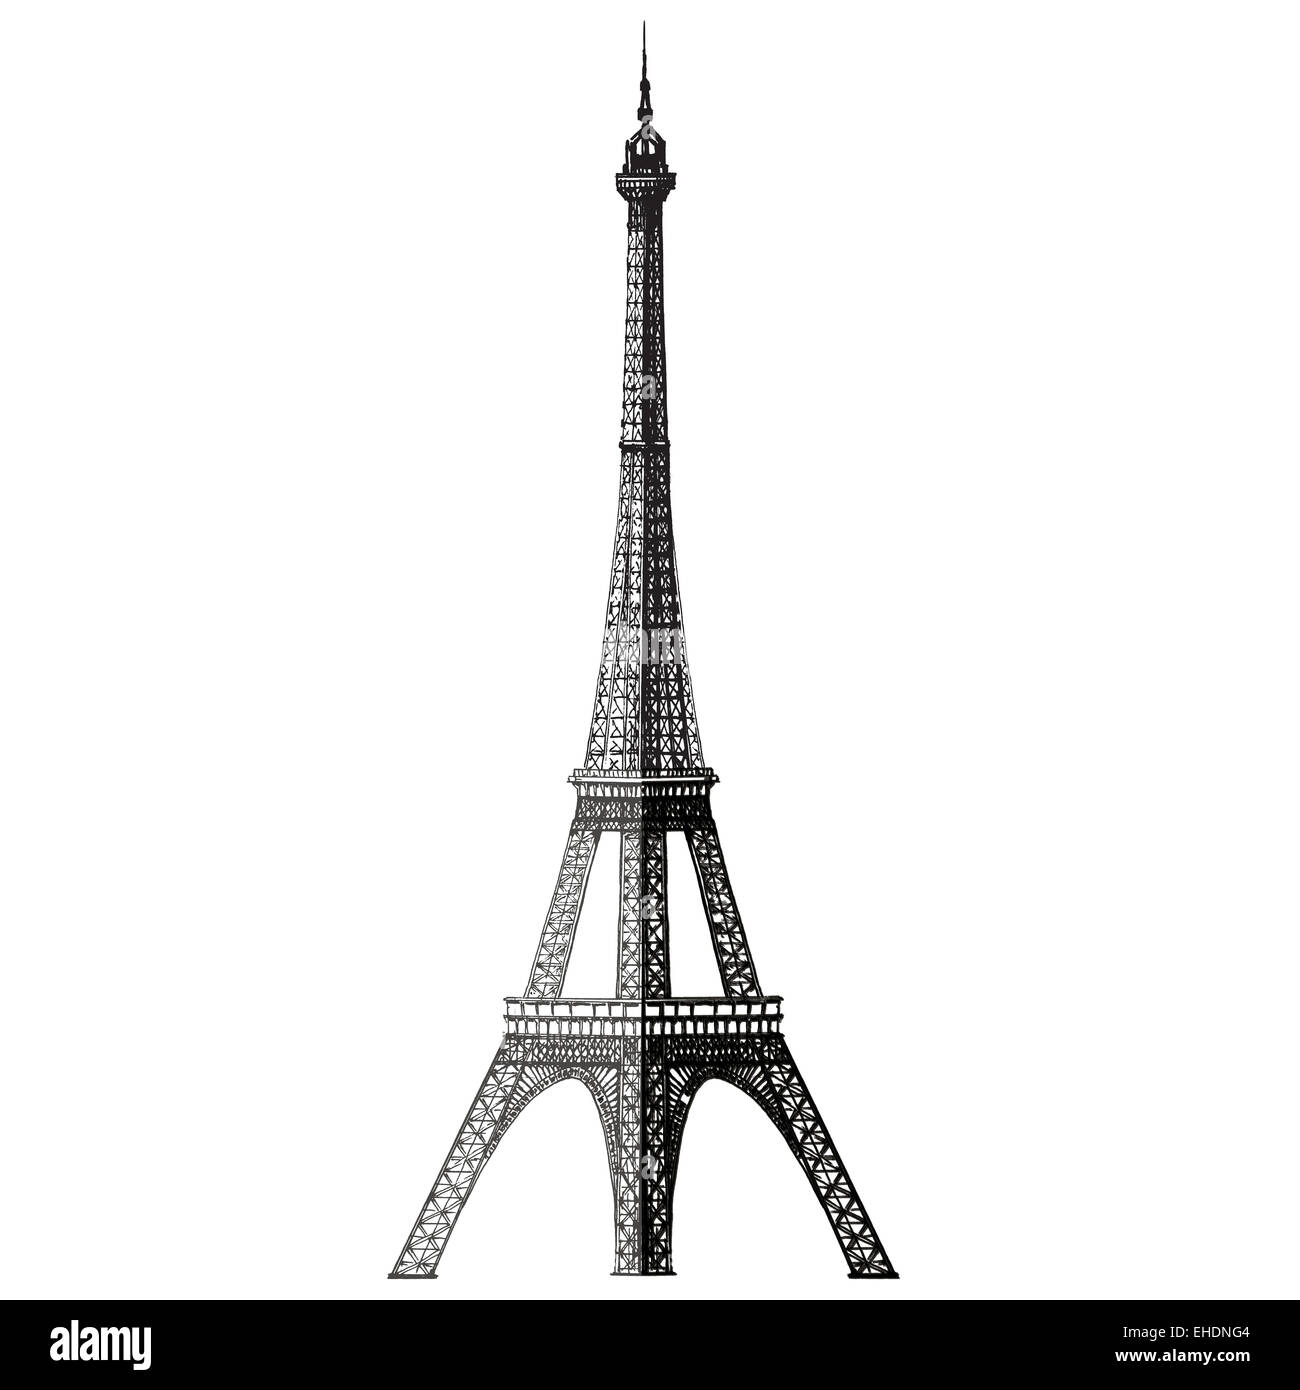 Paris Eiffel Tower Silhouette PNG And Vector Images Free Download - Pngtree